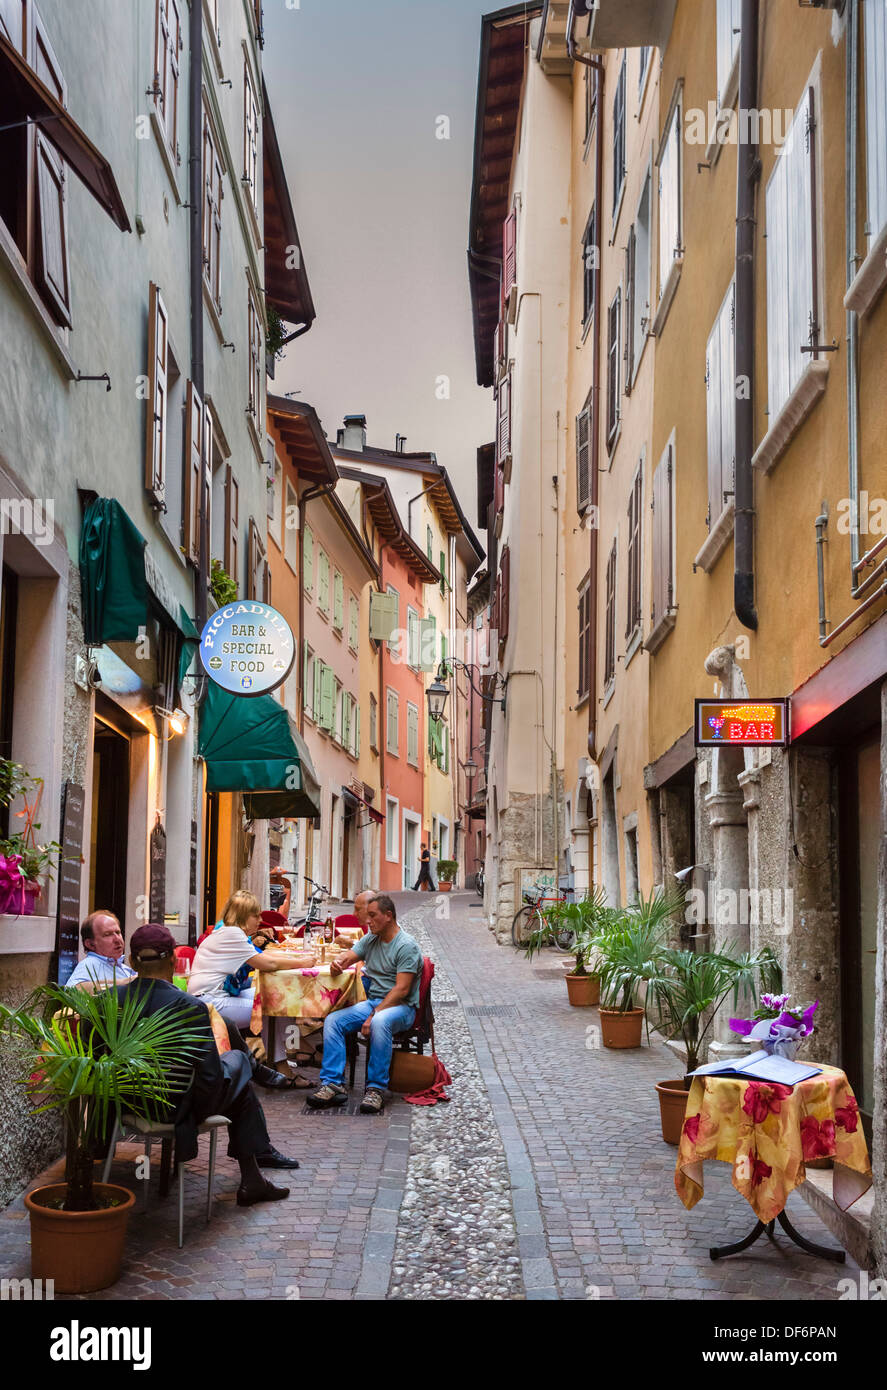 Restaurant in the early evening in a side street in the old town, Riva del Garda, Lake Garda, Trento, Italy Stock Photo